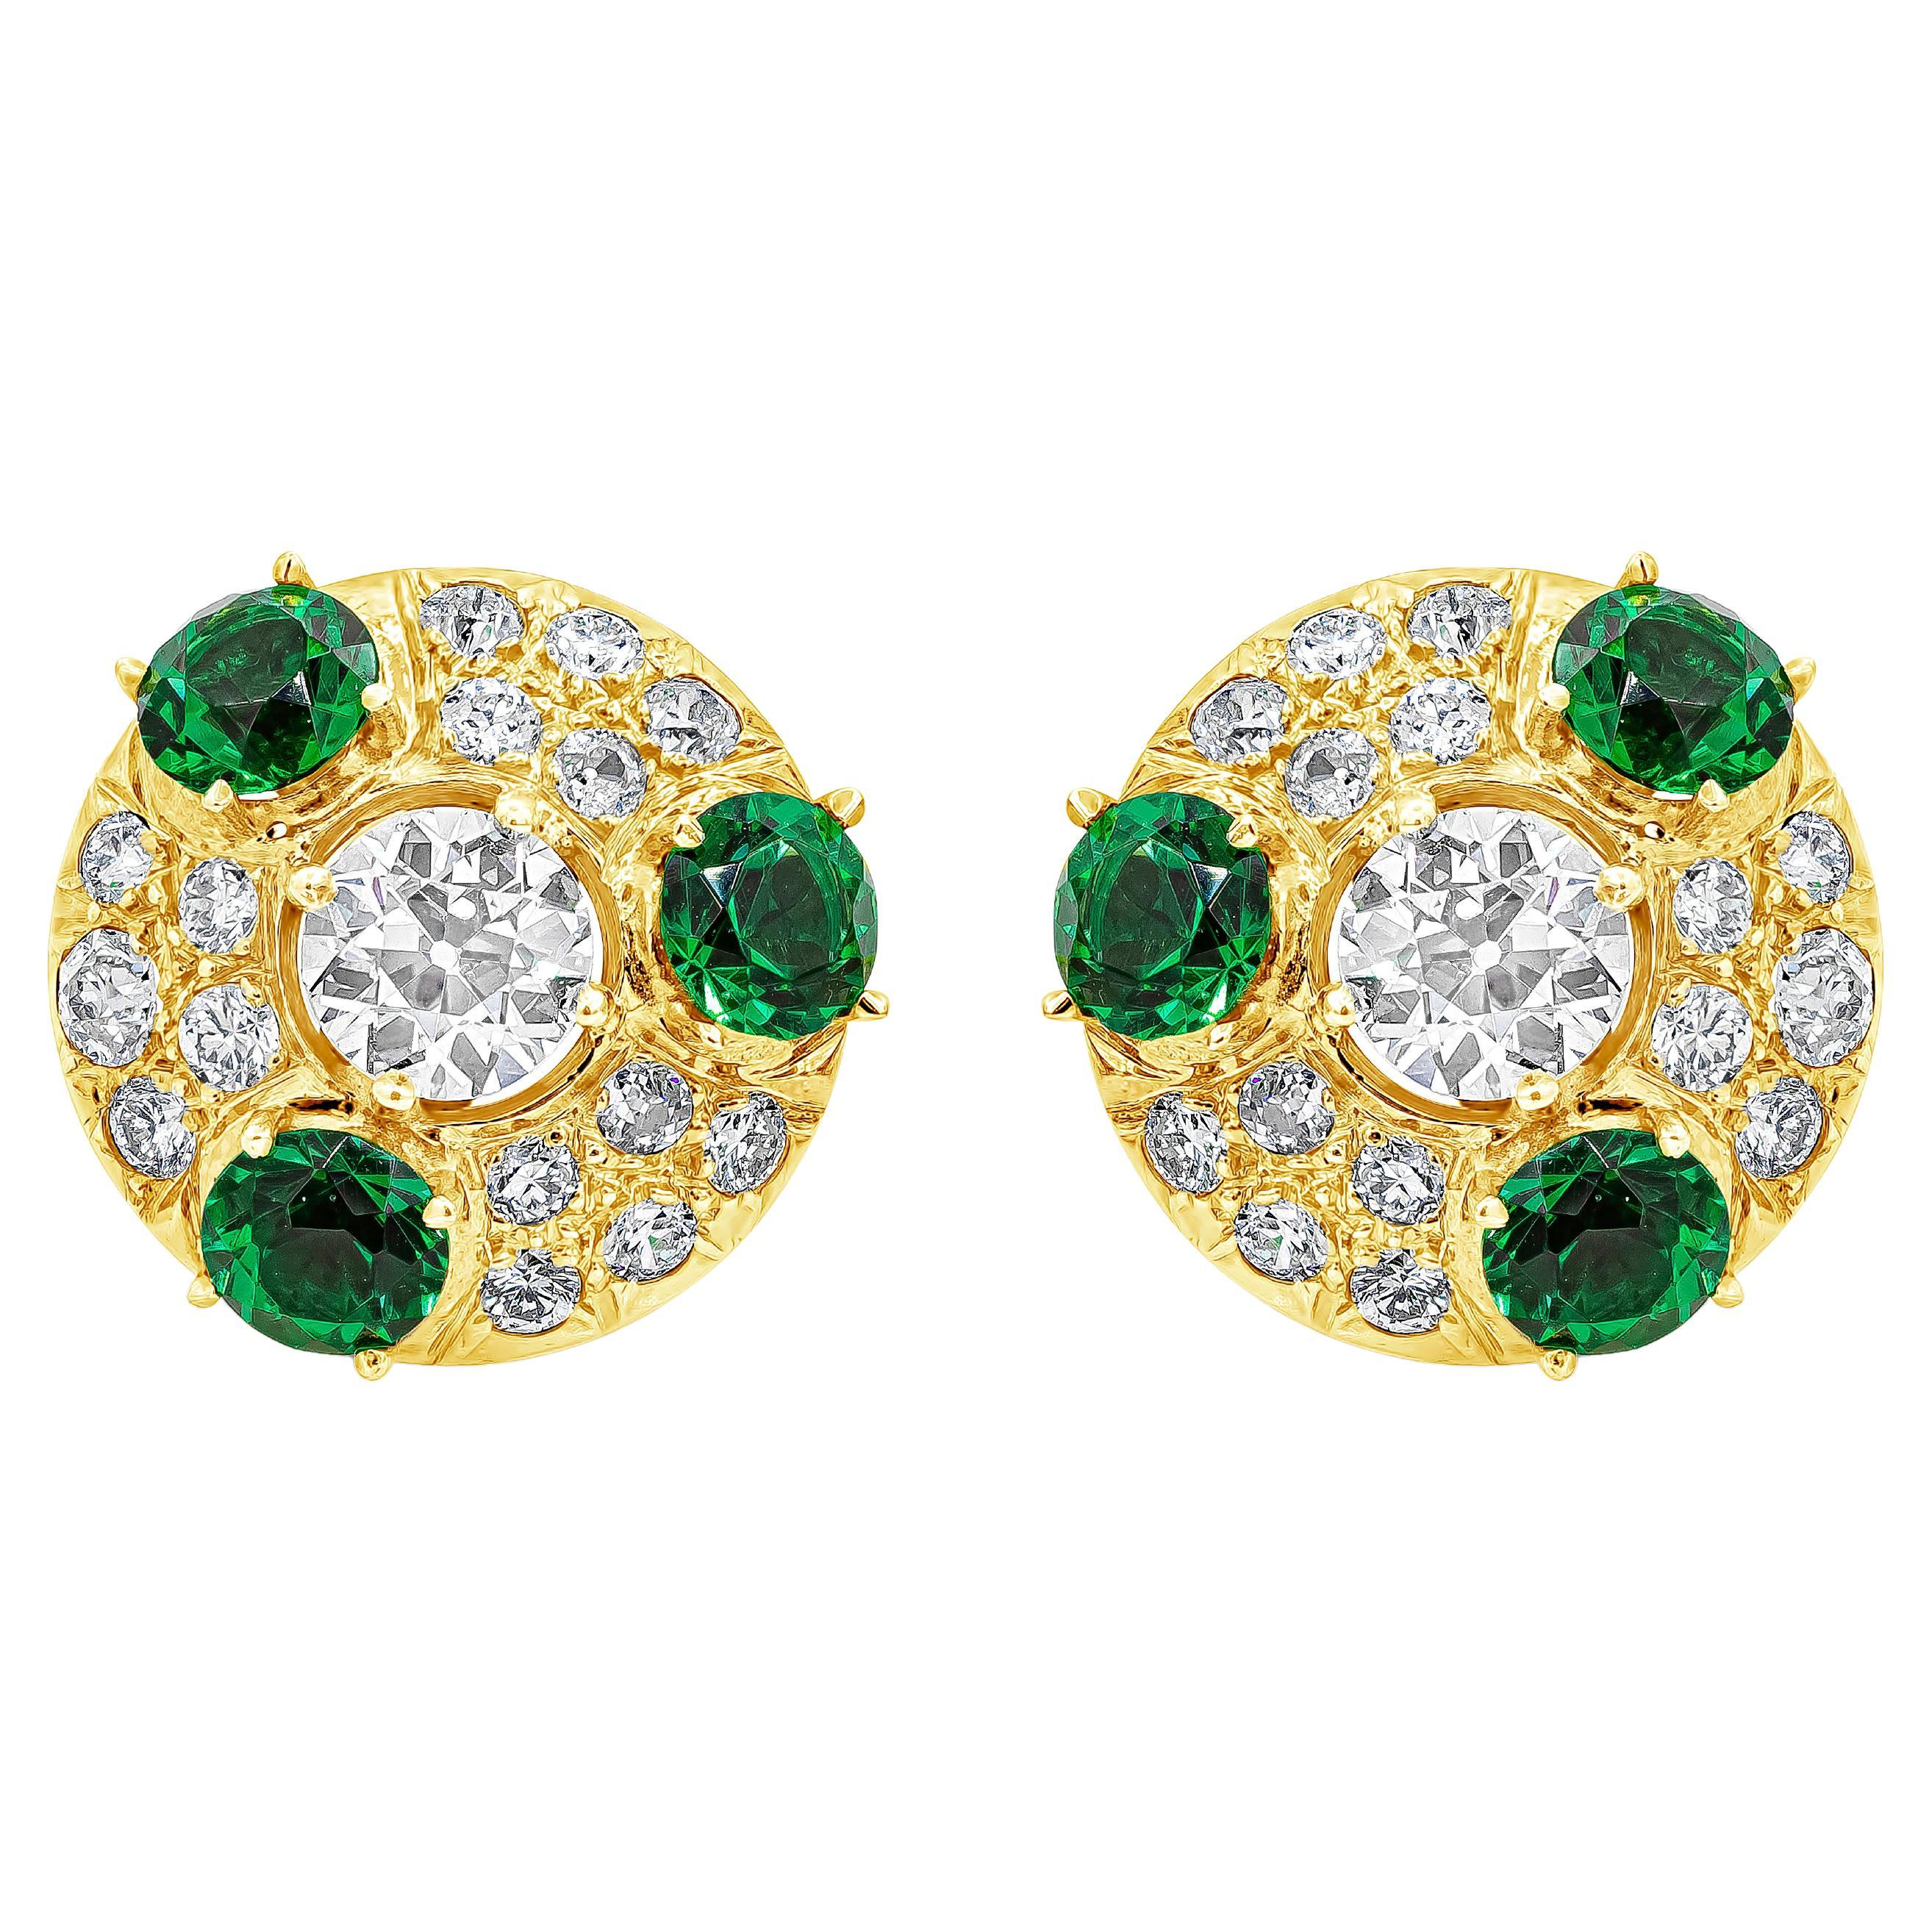 3.15 Carats Total Old European Cut Diamonds with Imitation Emerald Clip Earrings For Sale